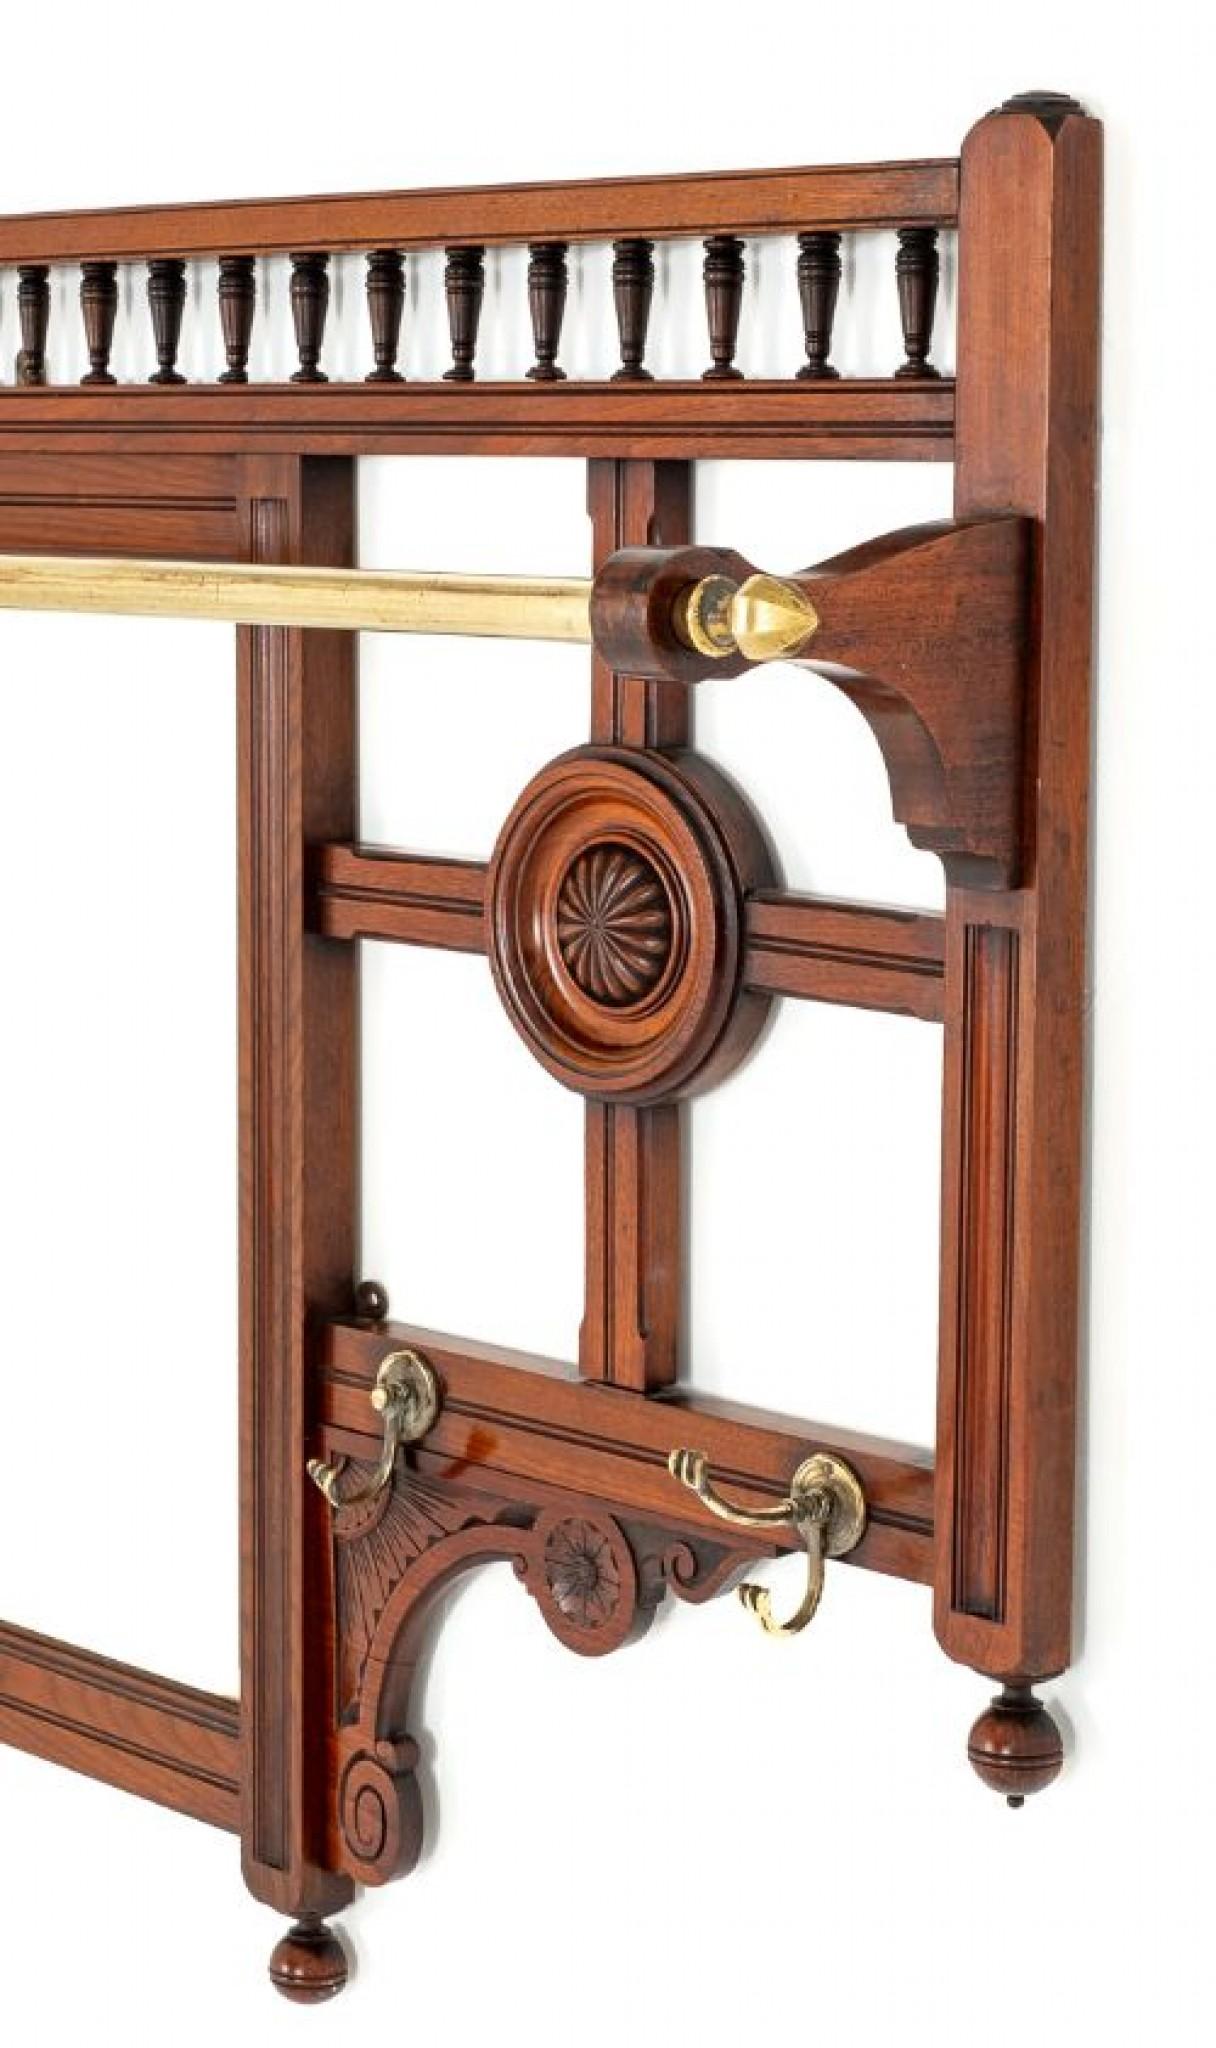 Late 19th Century Victorian Hall Tree Coat Rack Mirror For Sale